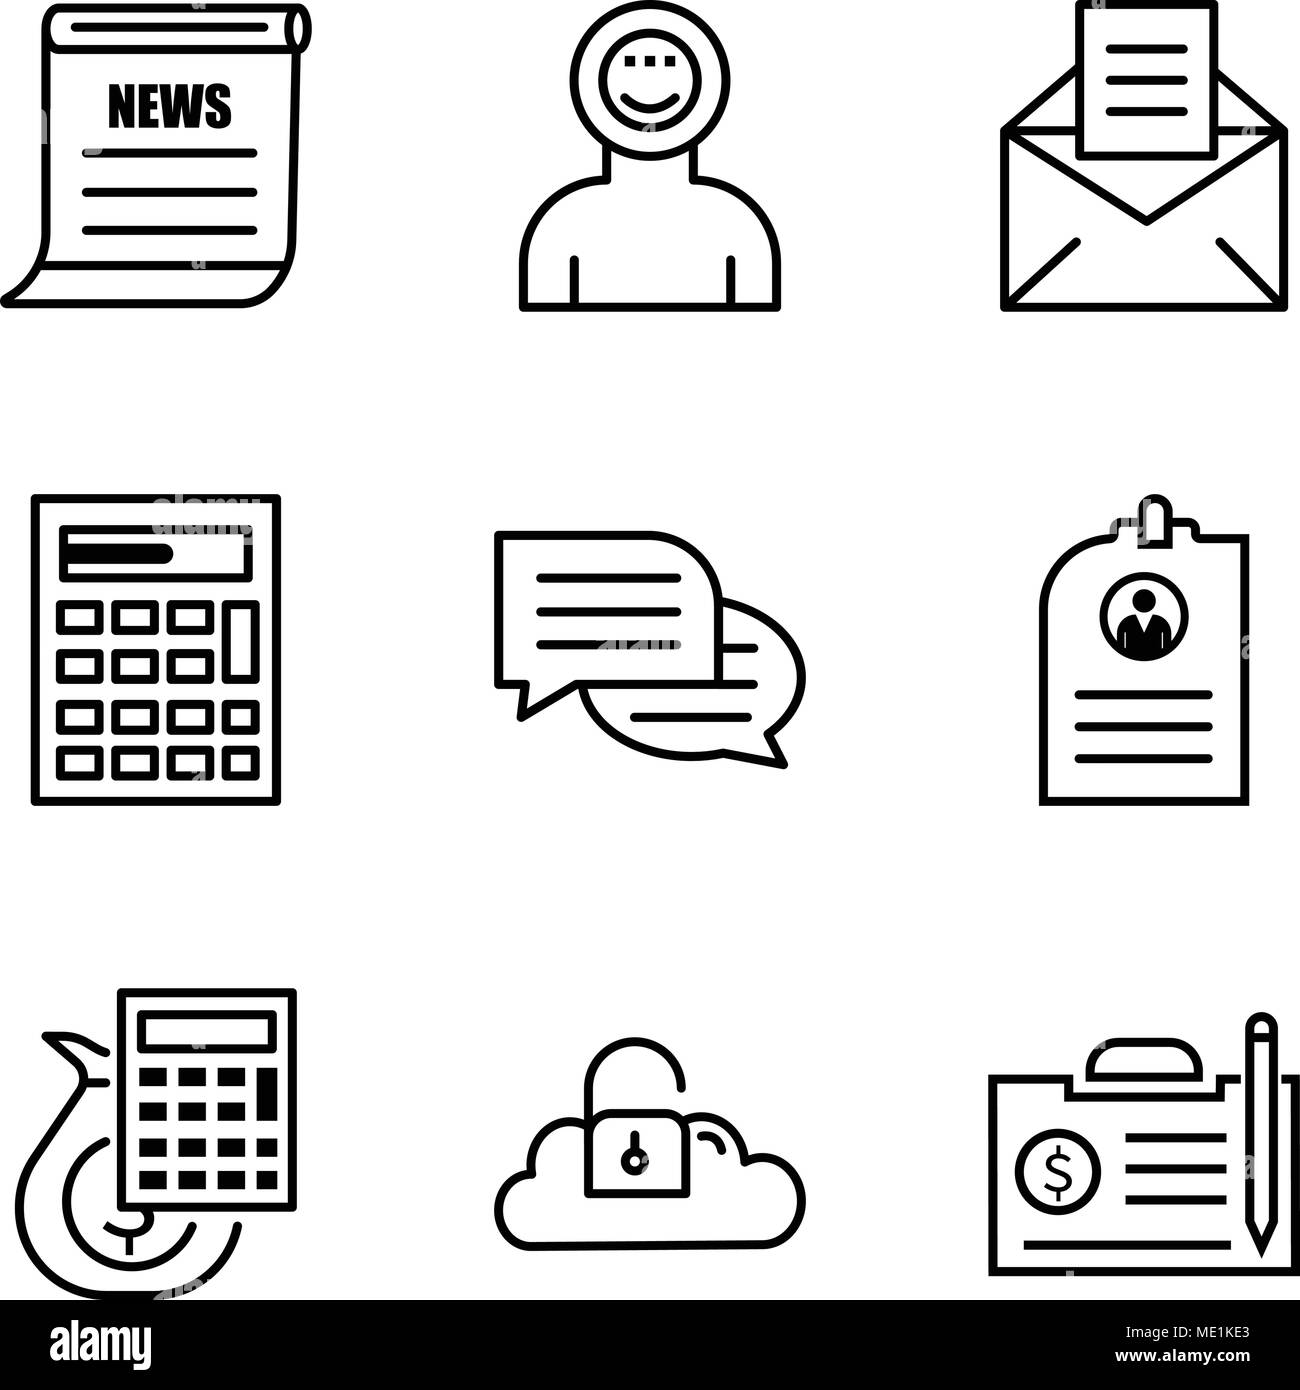 Set Of 9 simple editable icons such as contract, Key data, money calculator, CV, chat, calculator, email, astronaut, newspaper, can be used for mobile Stock Vector